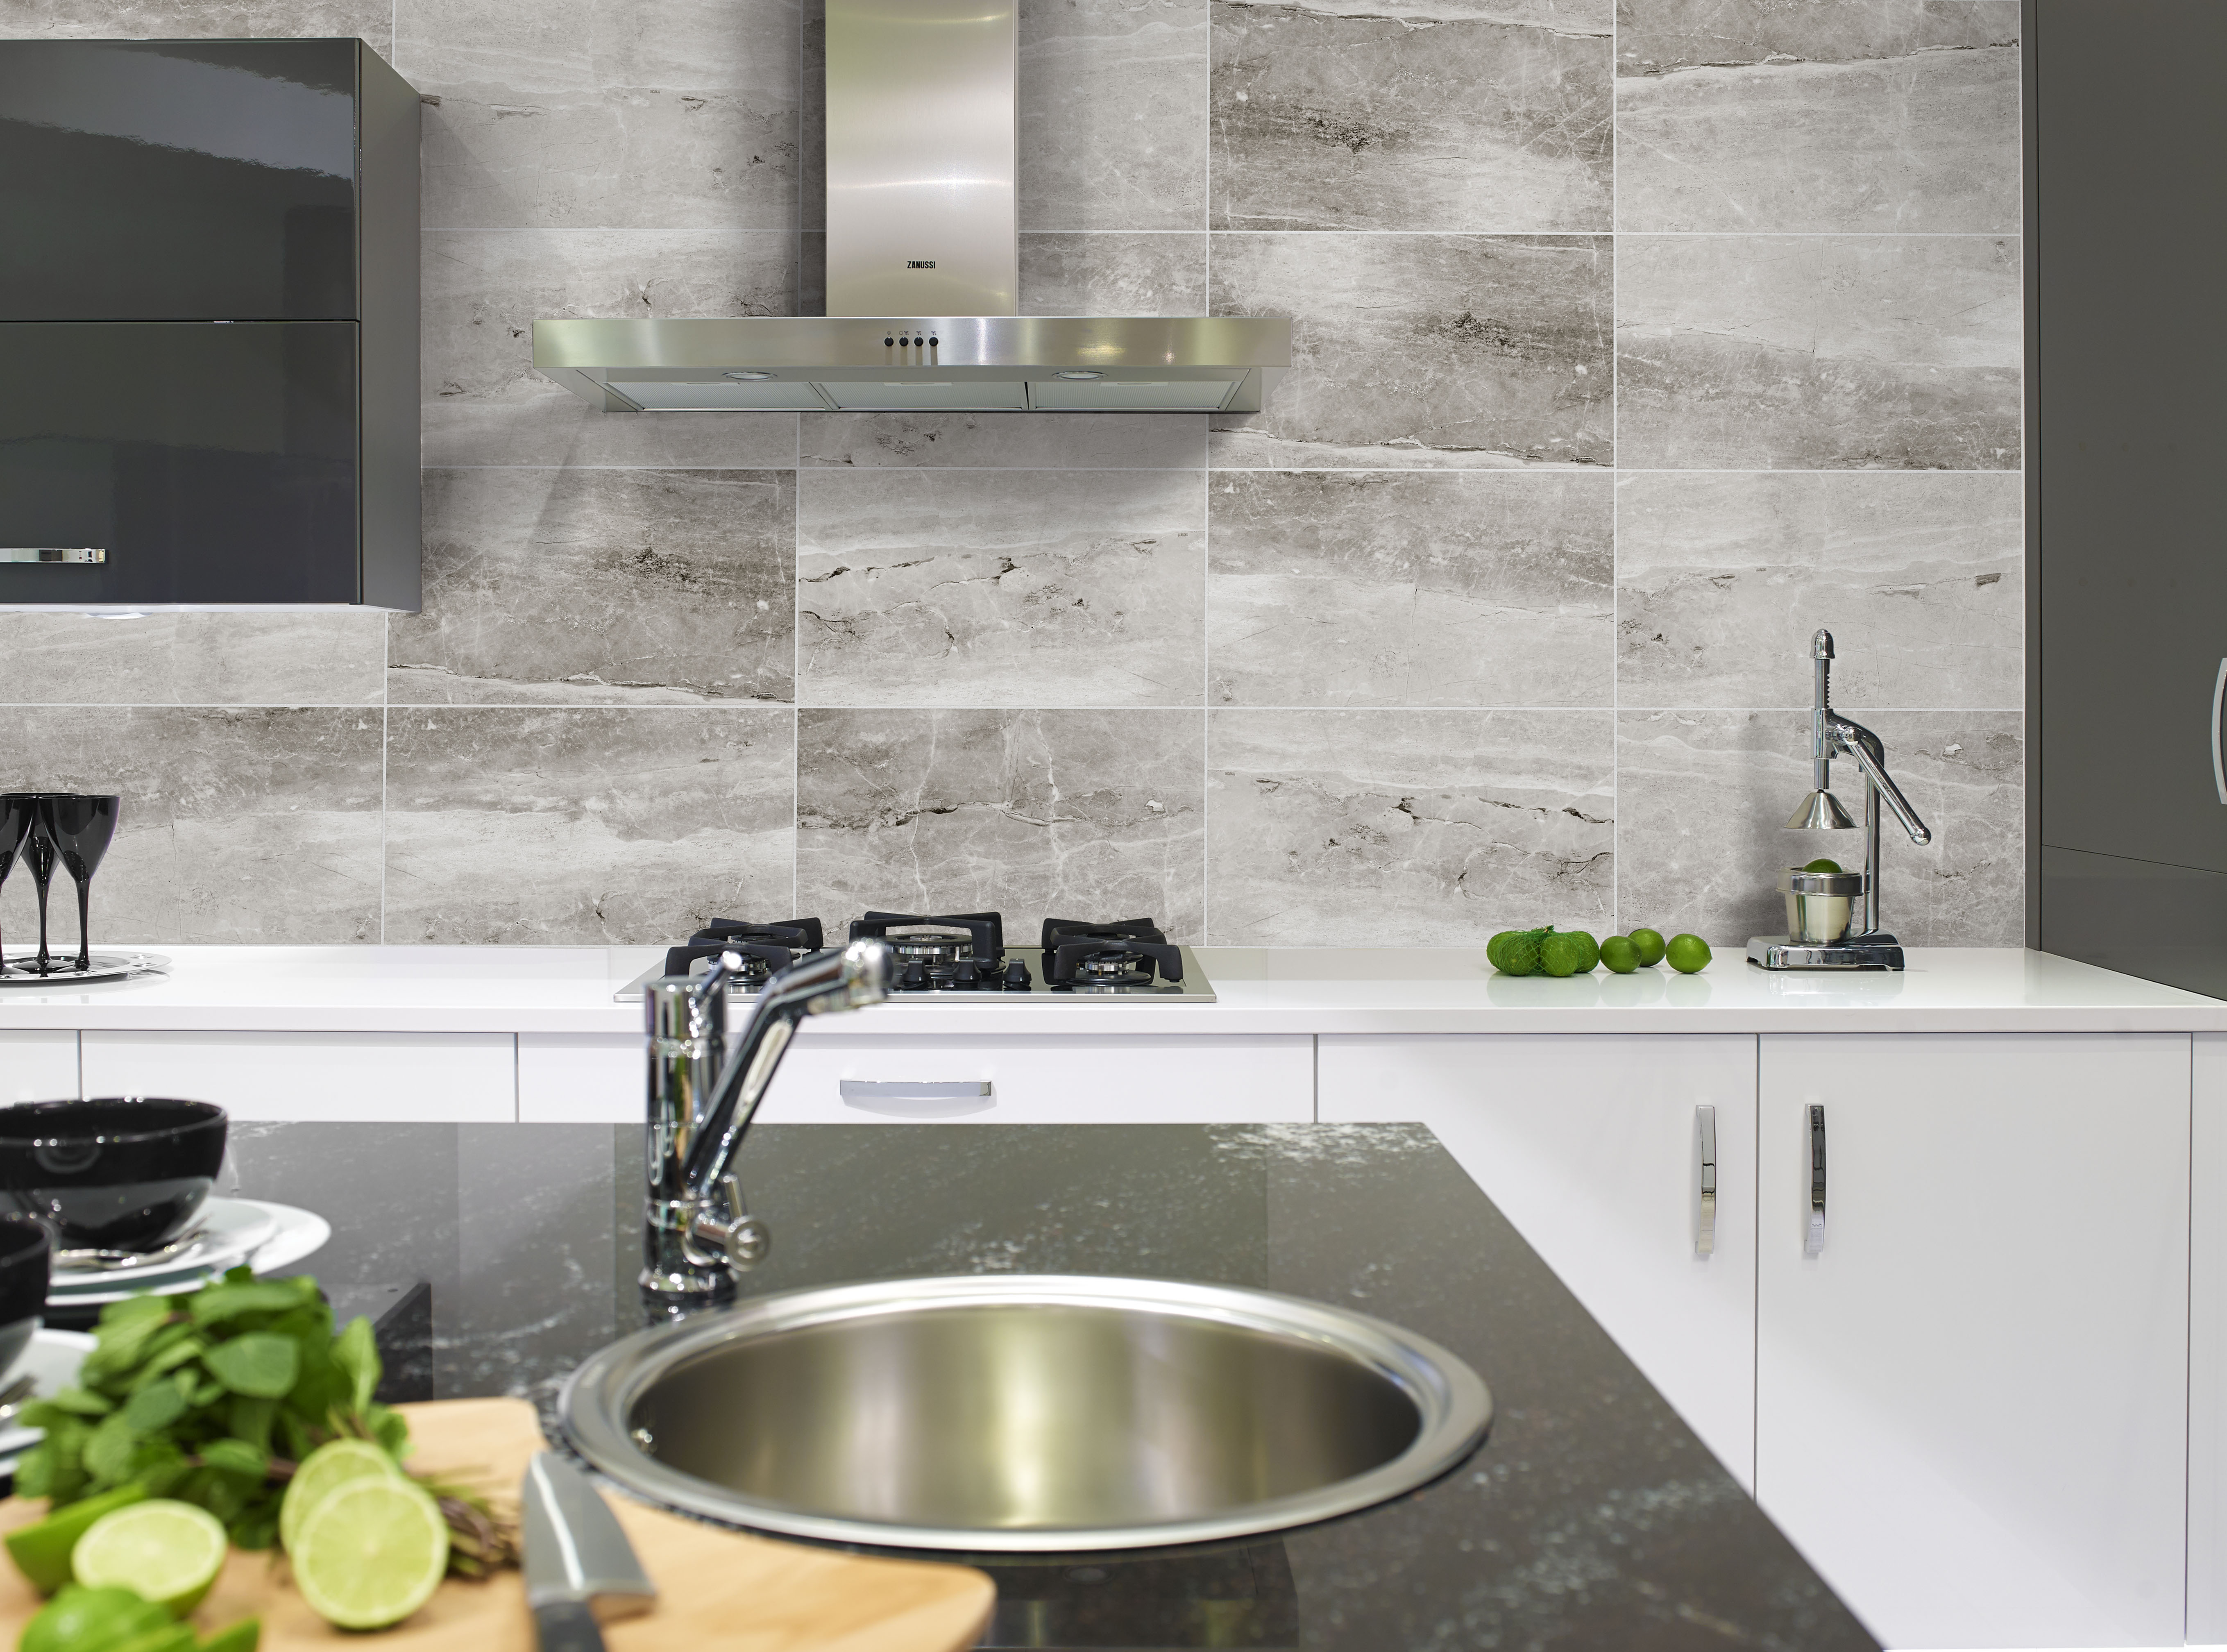 Create Exquisite Effects with Kitchen Wall Tiles - goodworksfurniture